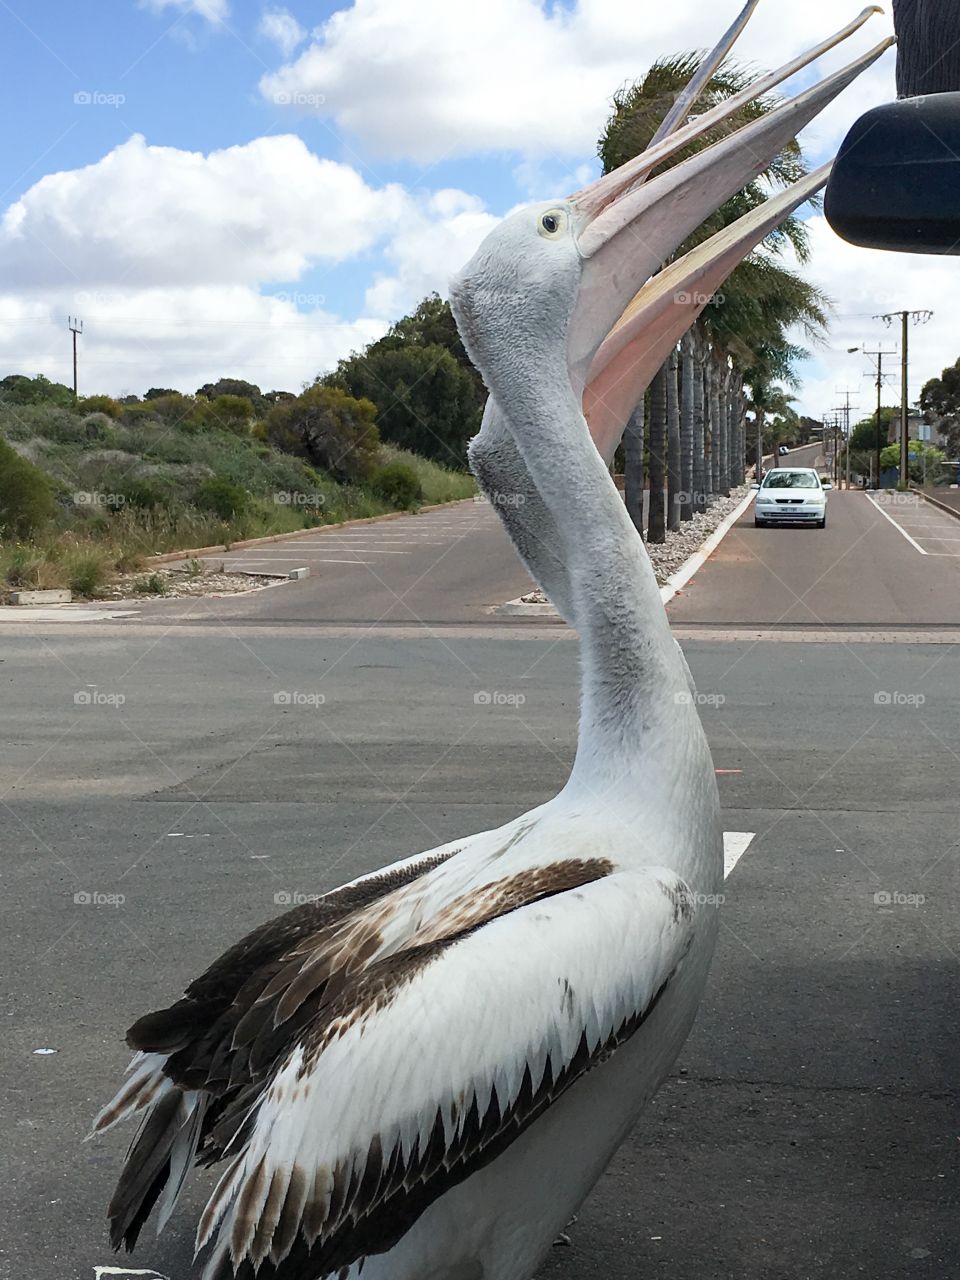 Two Bold Pelicans begging for food from
People in parked car at Australian beach